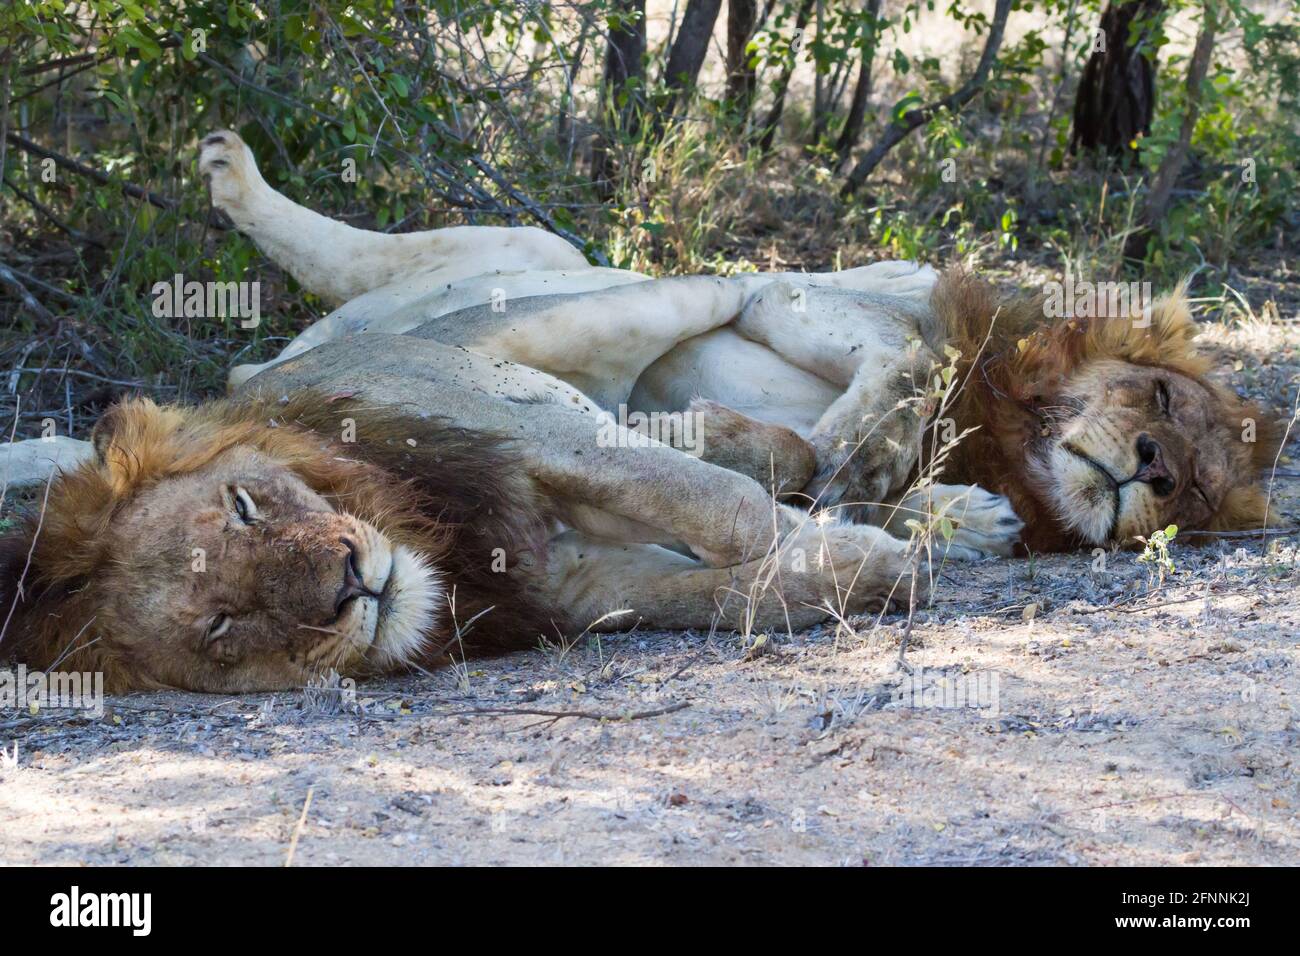 Two male lions (Panthera leo) cuddling, hugging and sleeping together legs intertwined in Kruger National Park, South Africa Stock Photo